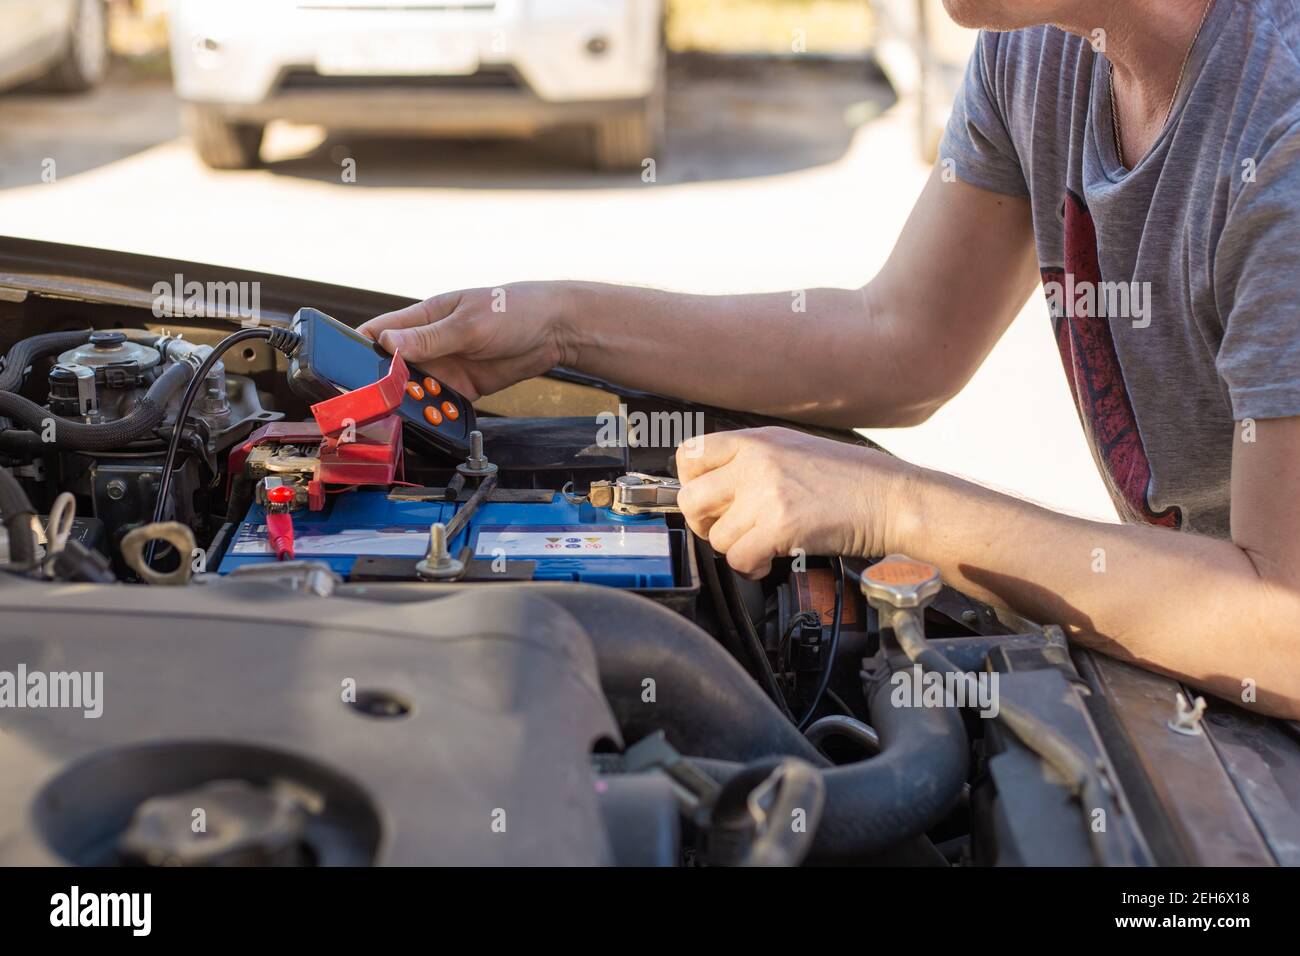 Car battery repair and inspection. The man measures the voltage and capacity of the battery with a tester. Car service. Stock Photo